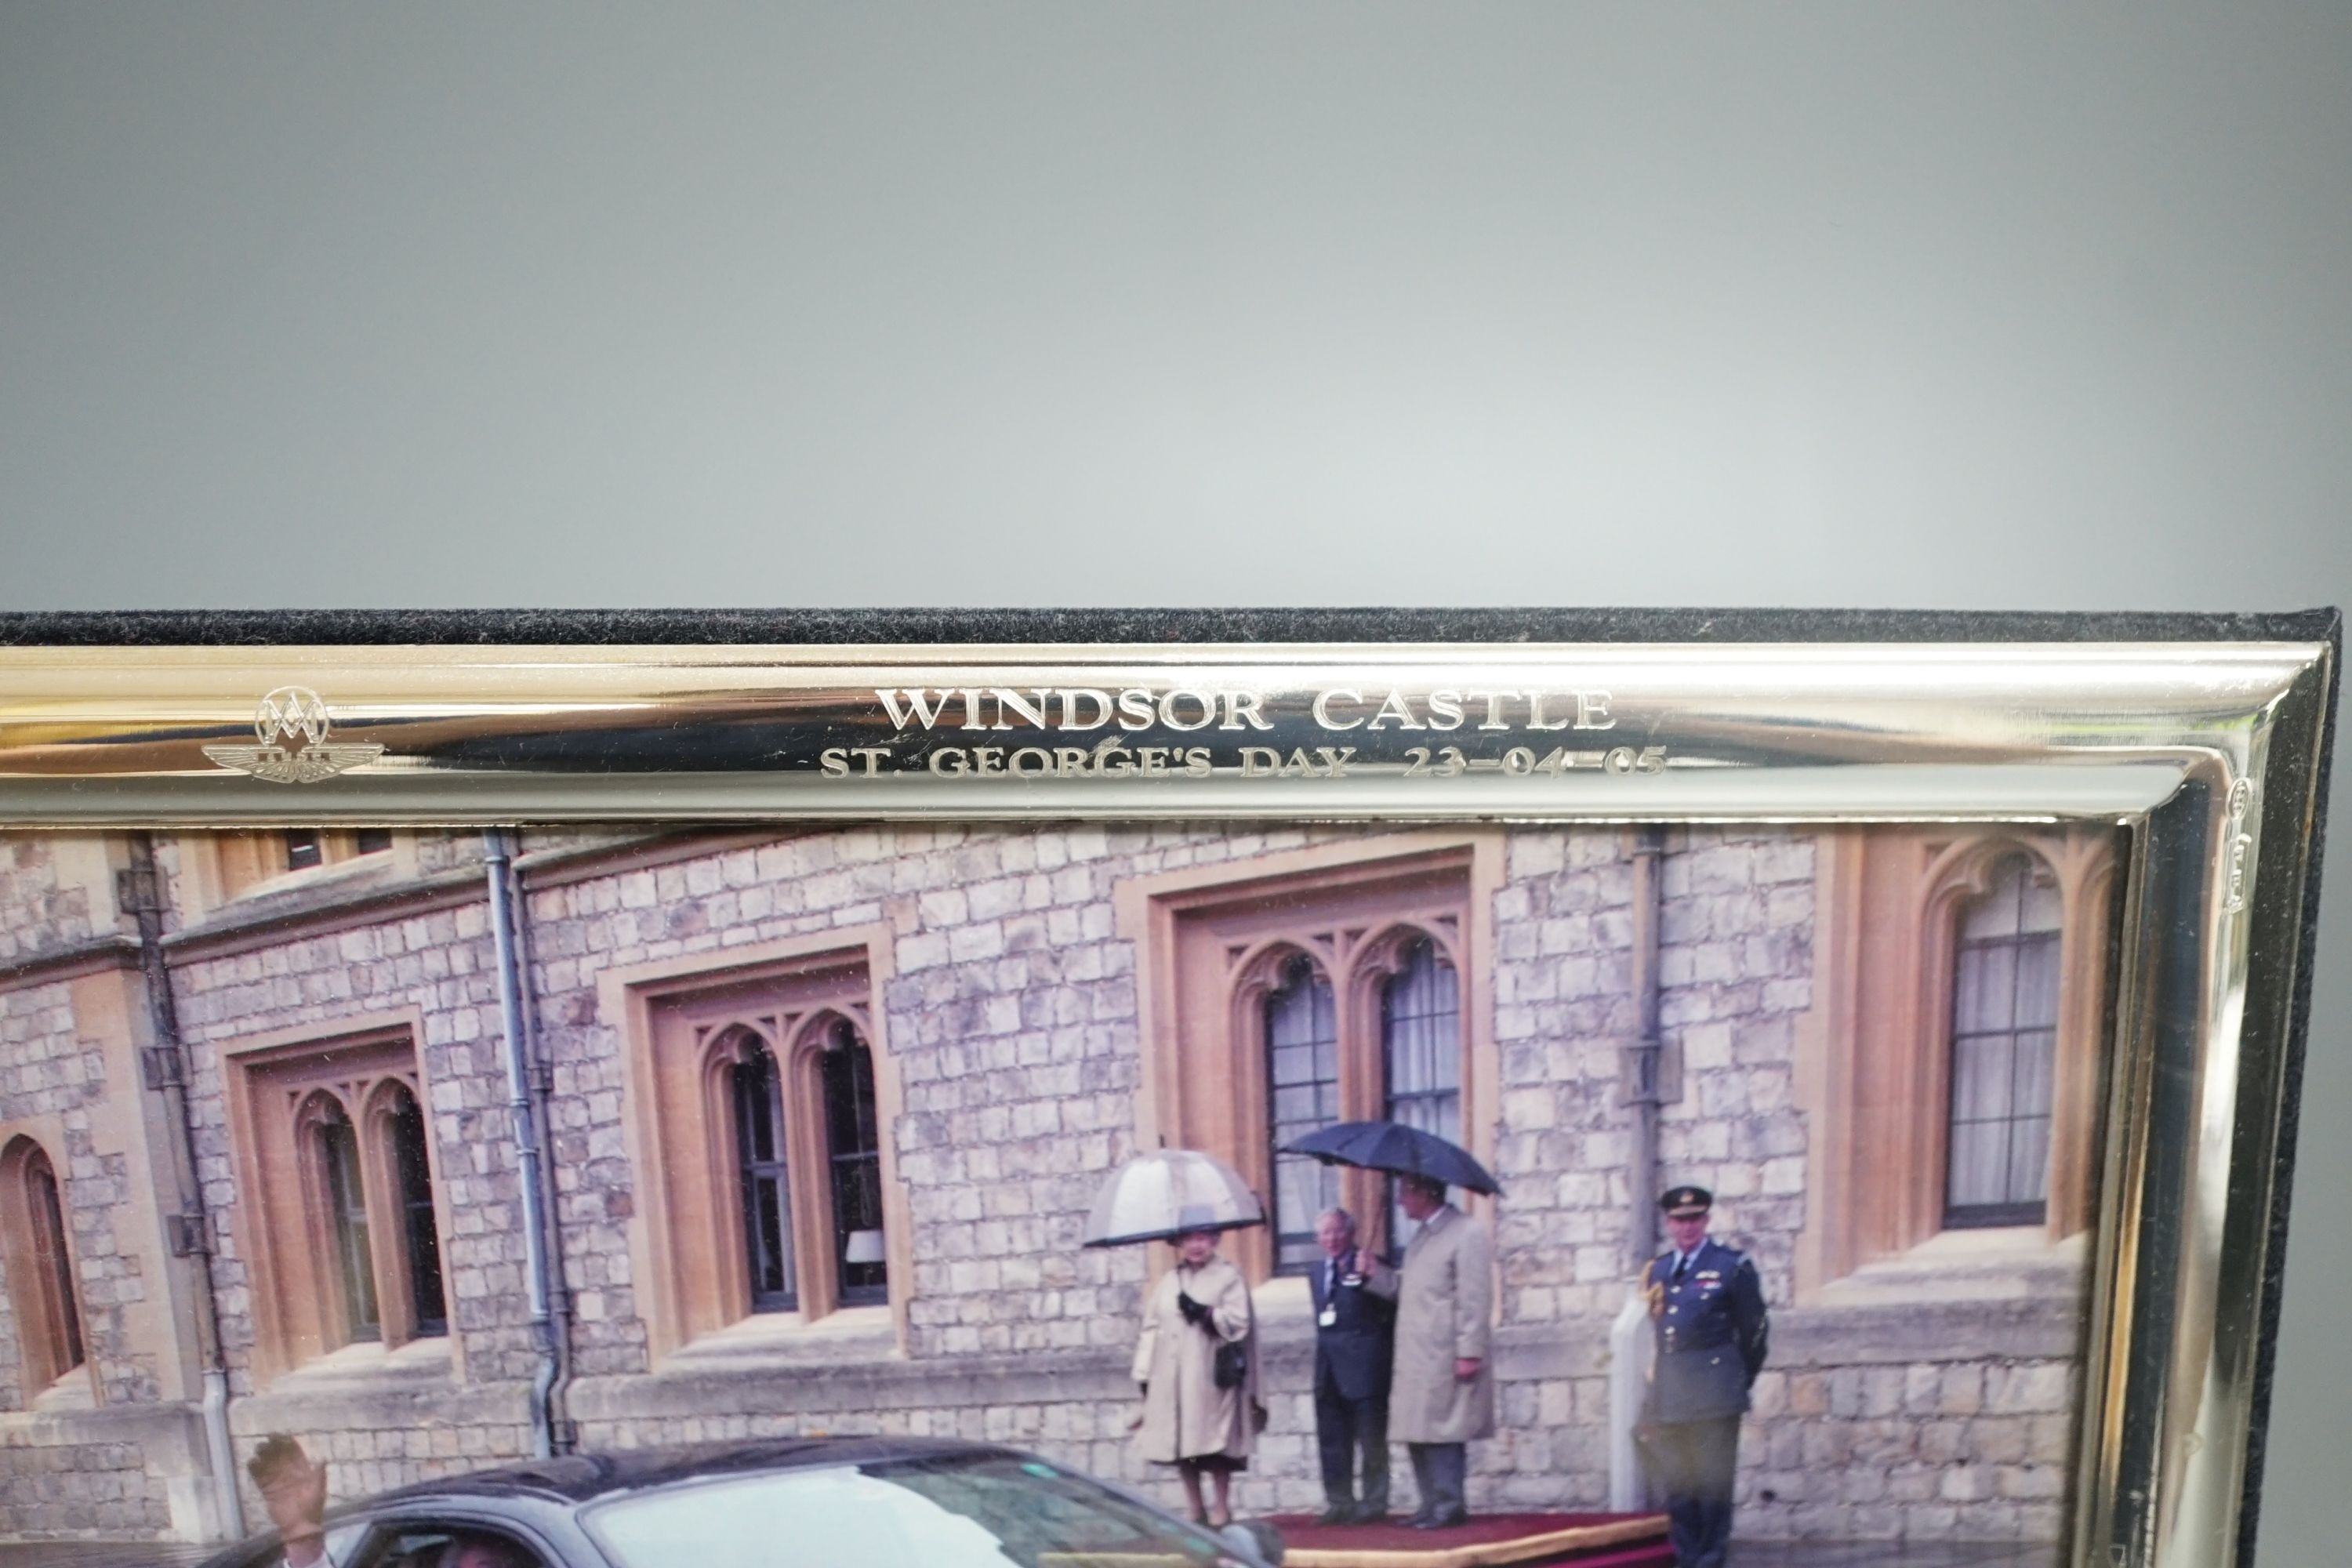 A modern Italian 925 mounted photograph frame, engraved with the Aston Martin Owners Club emblem and inscribed 'Windsor Castle St. Georges Day 23/04/05', 23.1cm by 18.2cm.